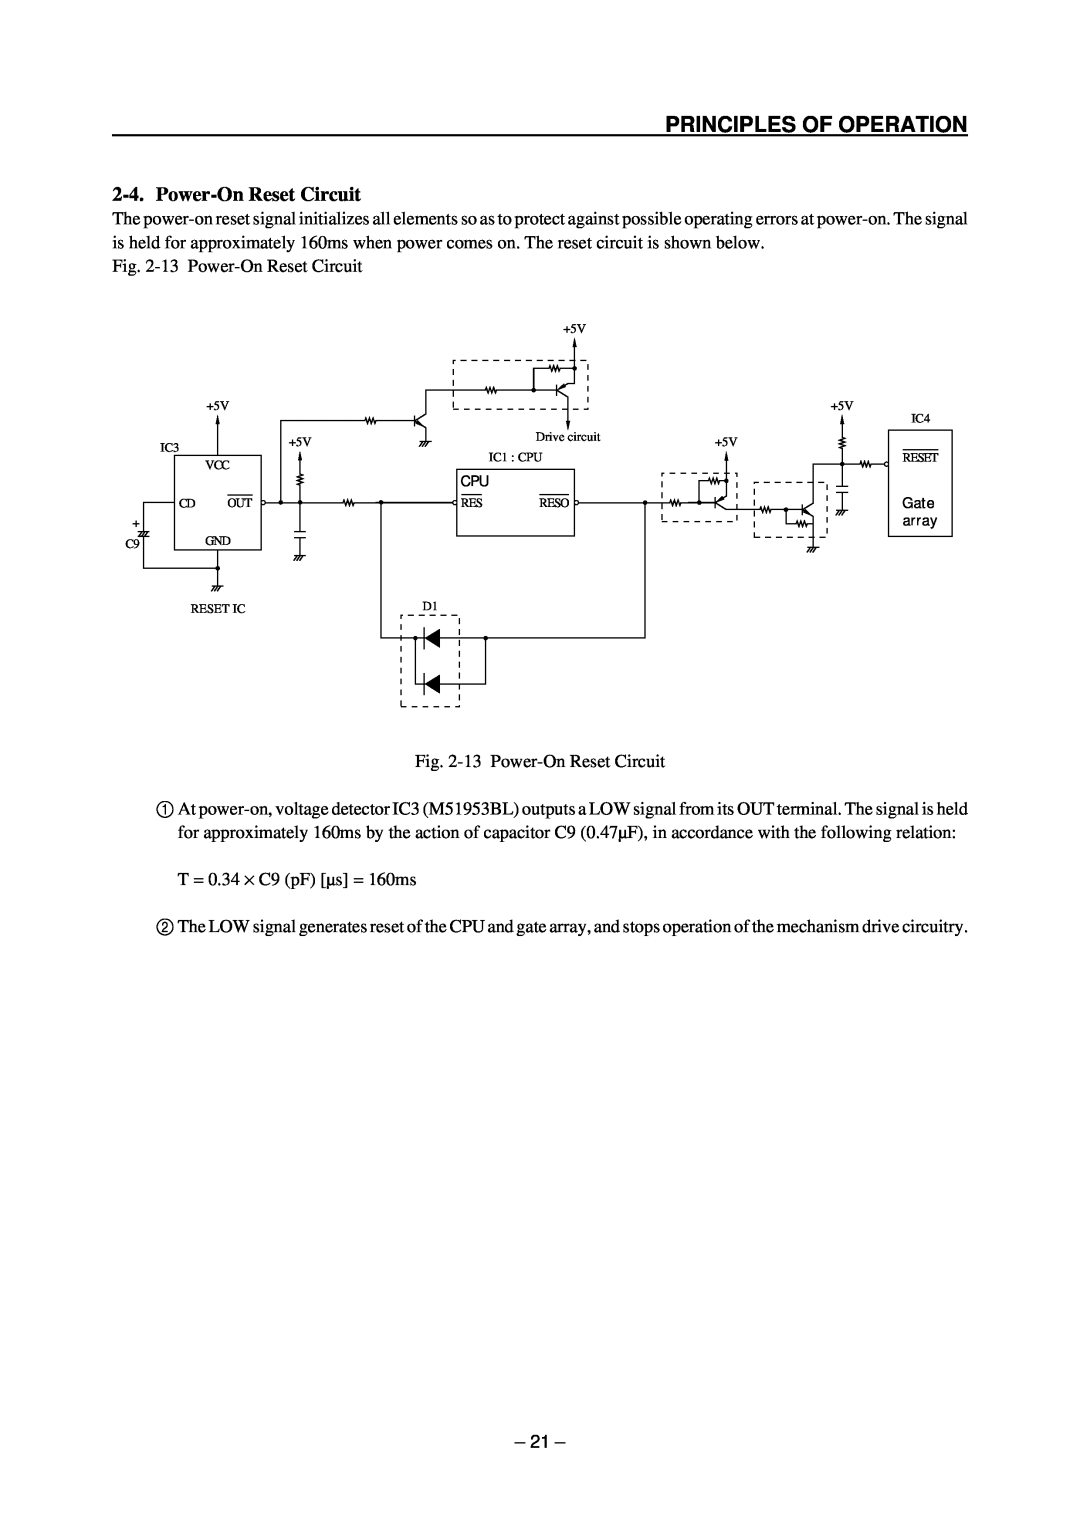 Star Micronics TSP200 technical manual Power-On Reset Circuit, Principles Of Operation 